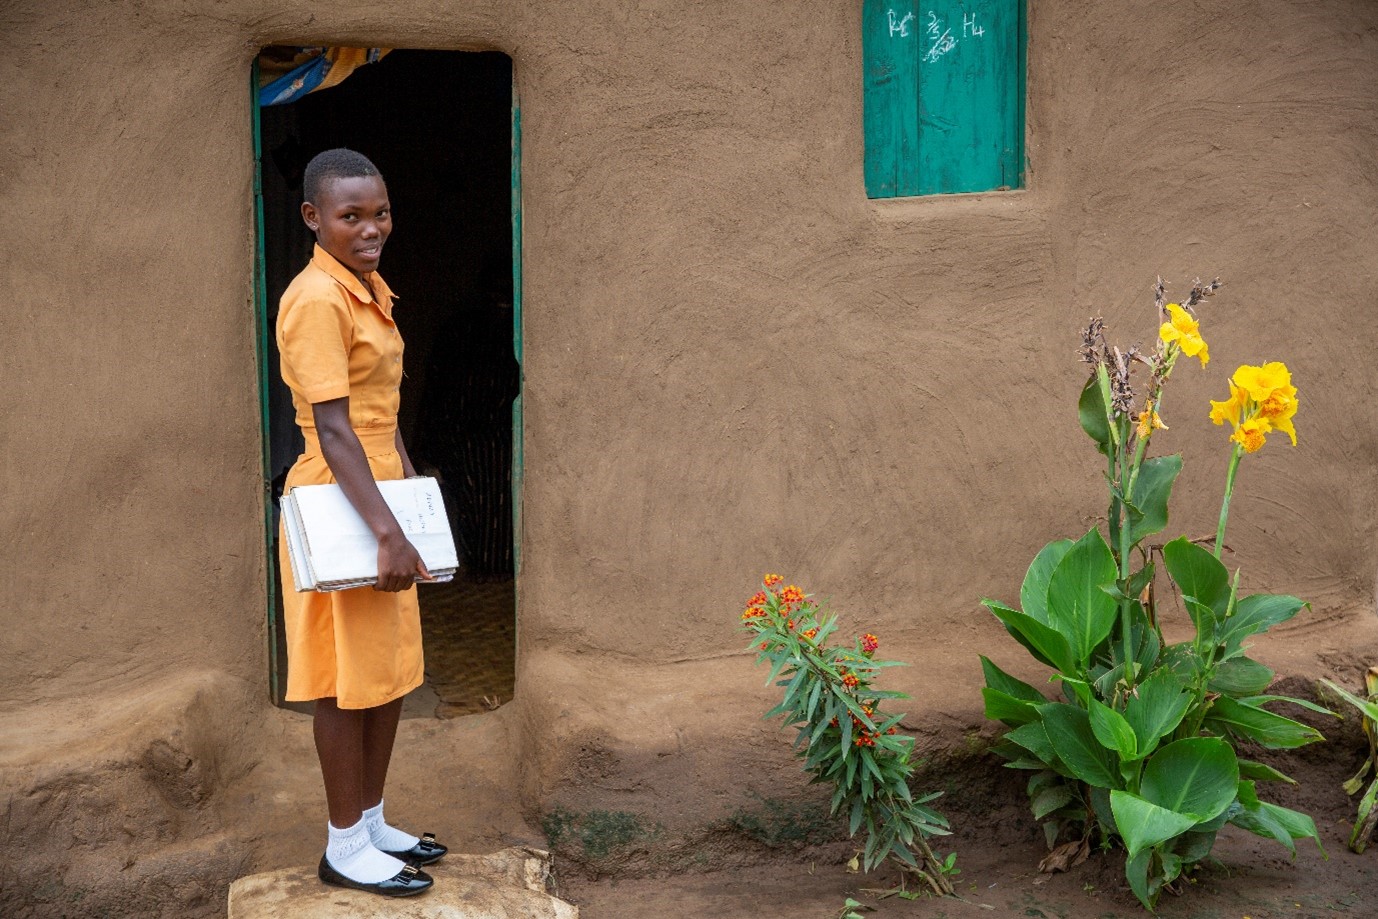 How all girls can go to school. The story of Miremba